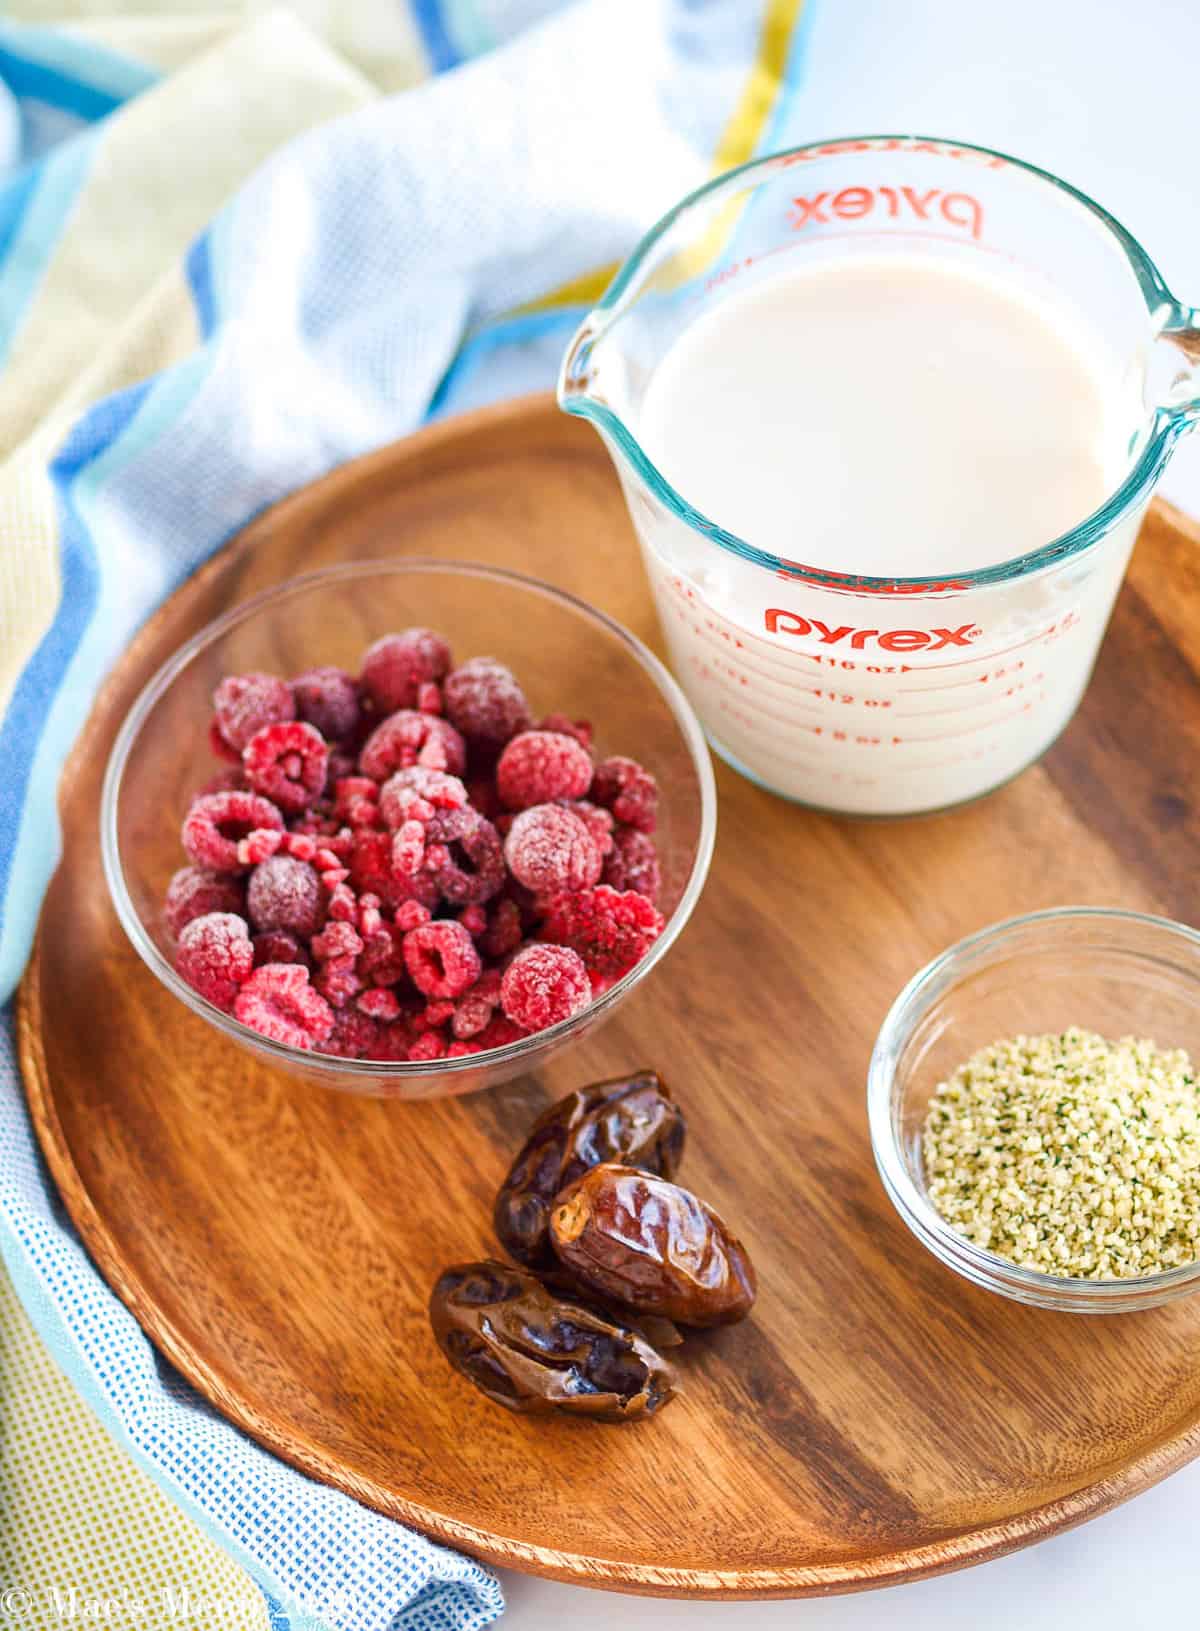 Some of the ingredients for a creamy raspberry smoothie: a cup of frozen raspberries, a 2 cup measuring cup of almond milk, 3 dates, and a small bowl of hemp seeds. 